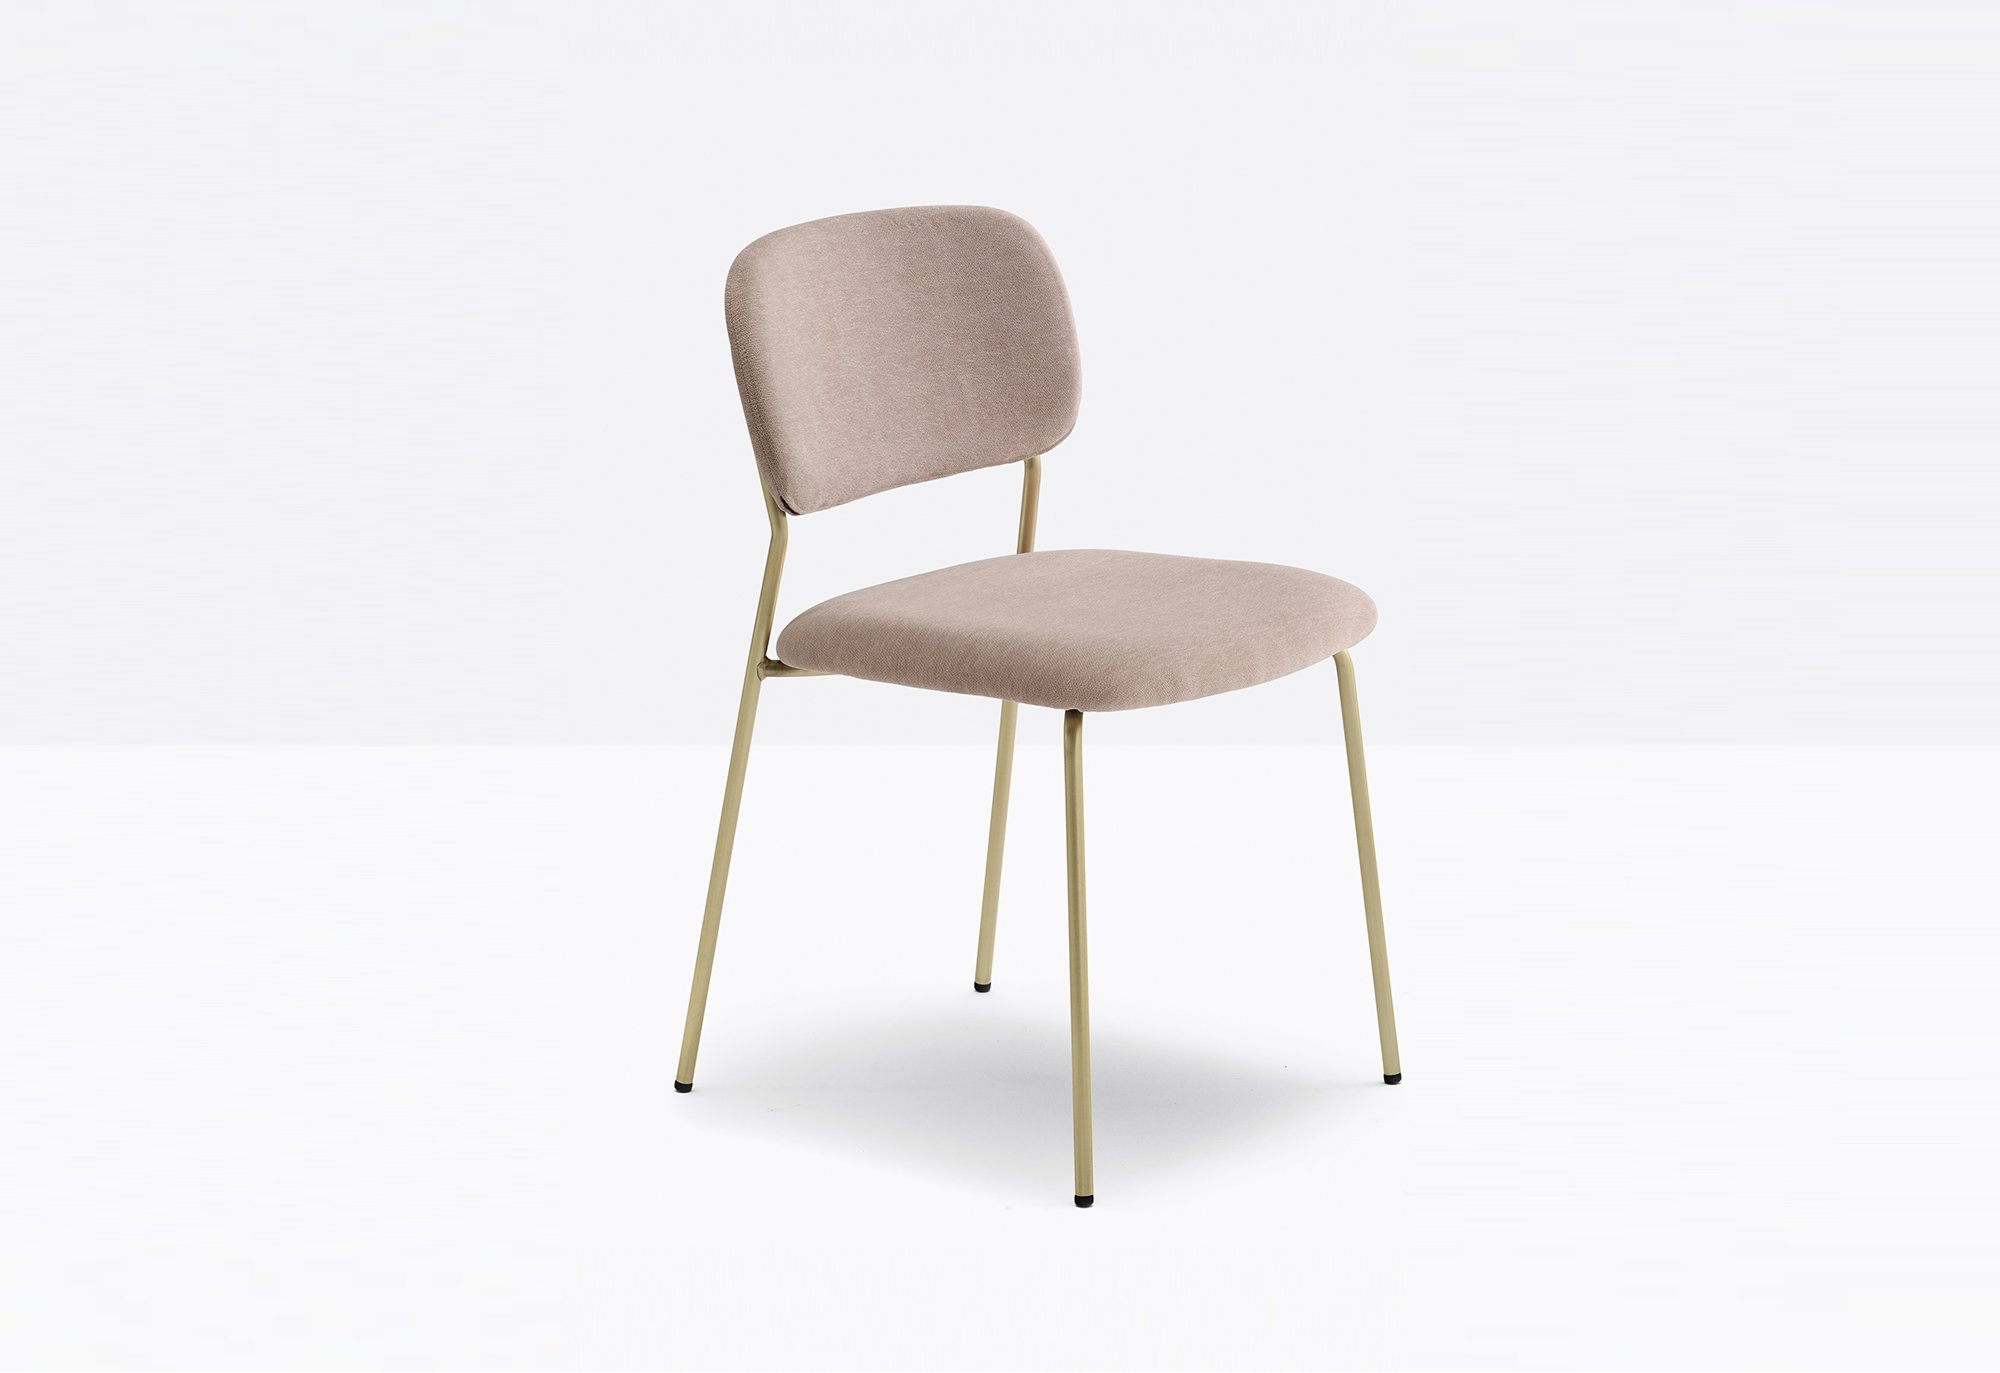 Jazz 3719 Chair from Pedrali, designed by Pedrali R&D